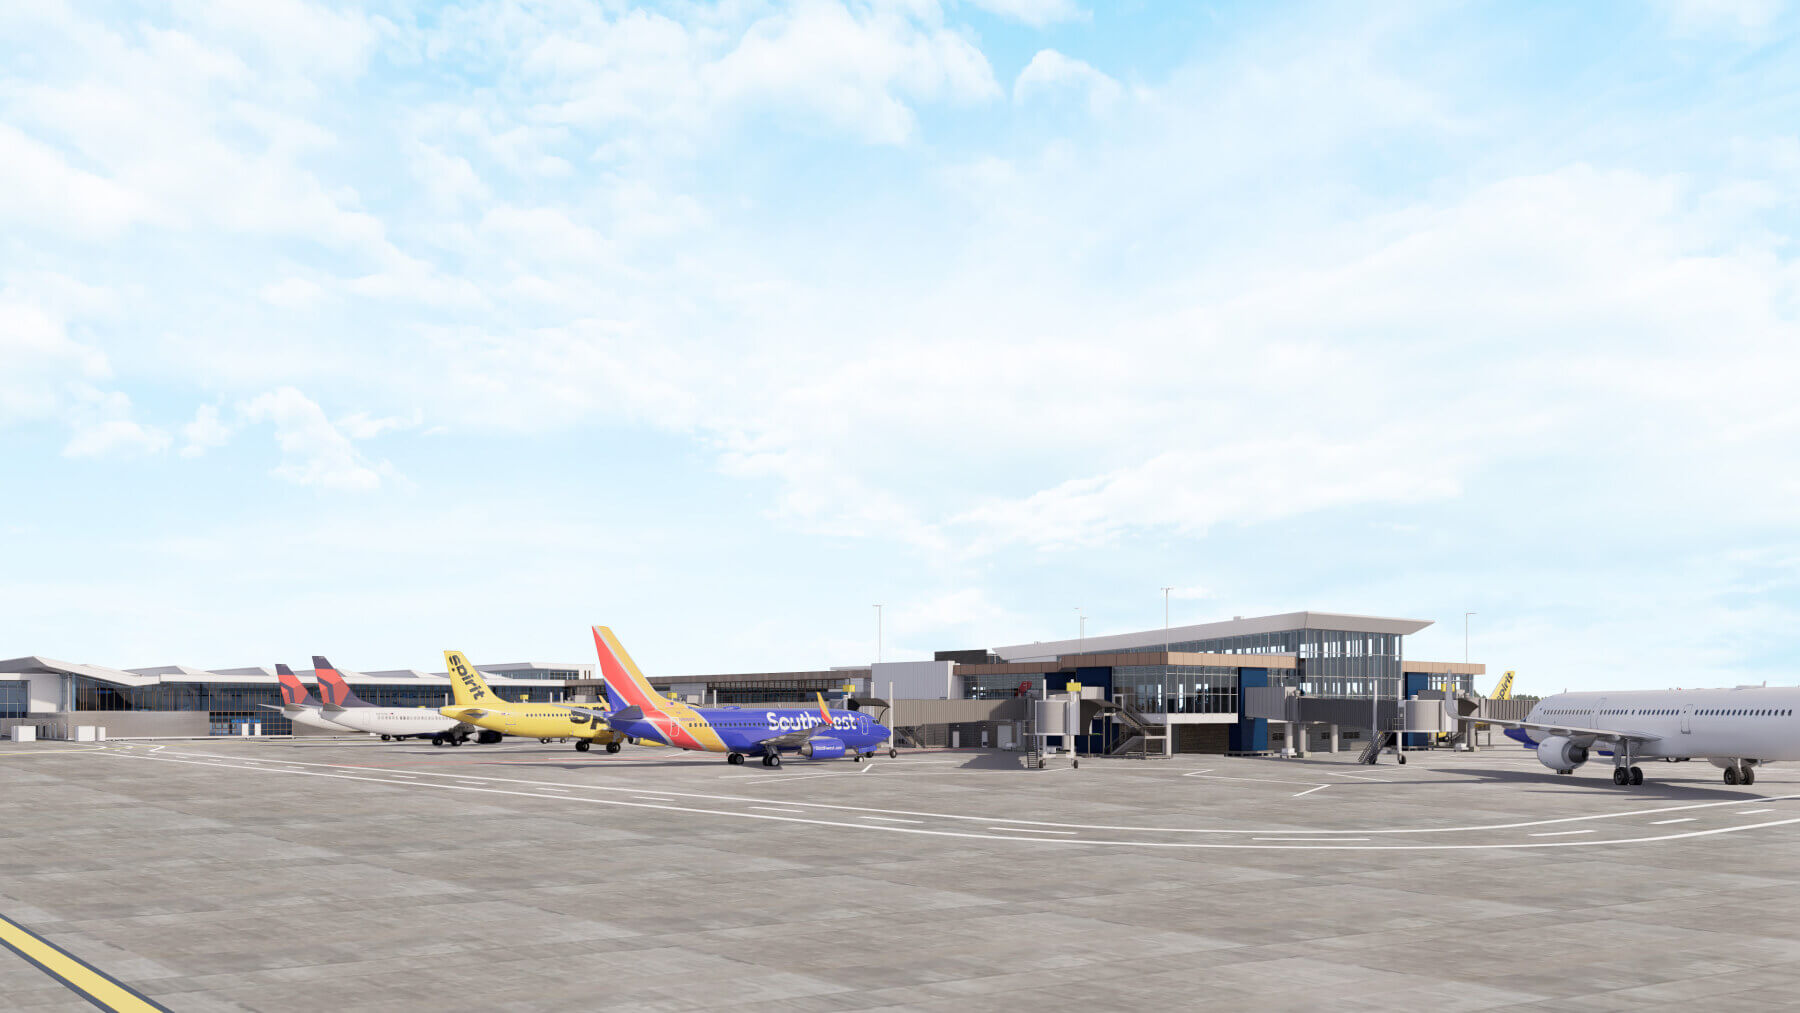 rendering with a group of planes parked outside the expansion of Concourse A at Myrtle Beach International Airport